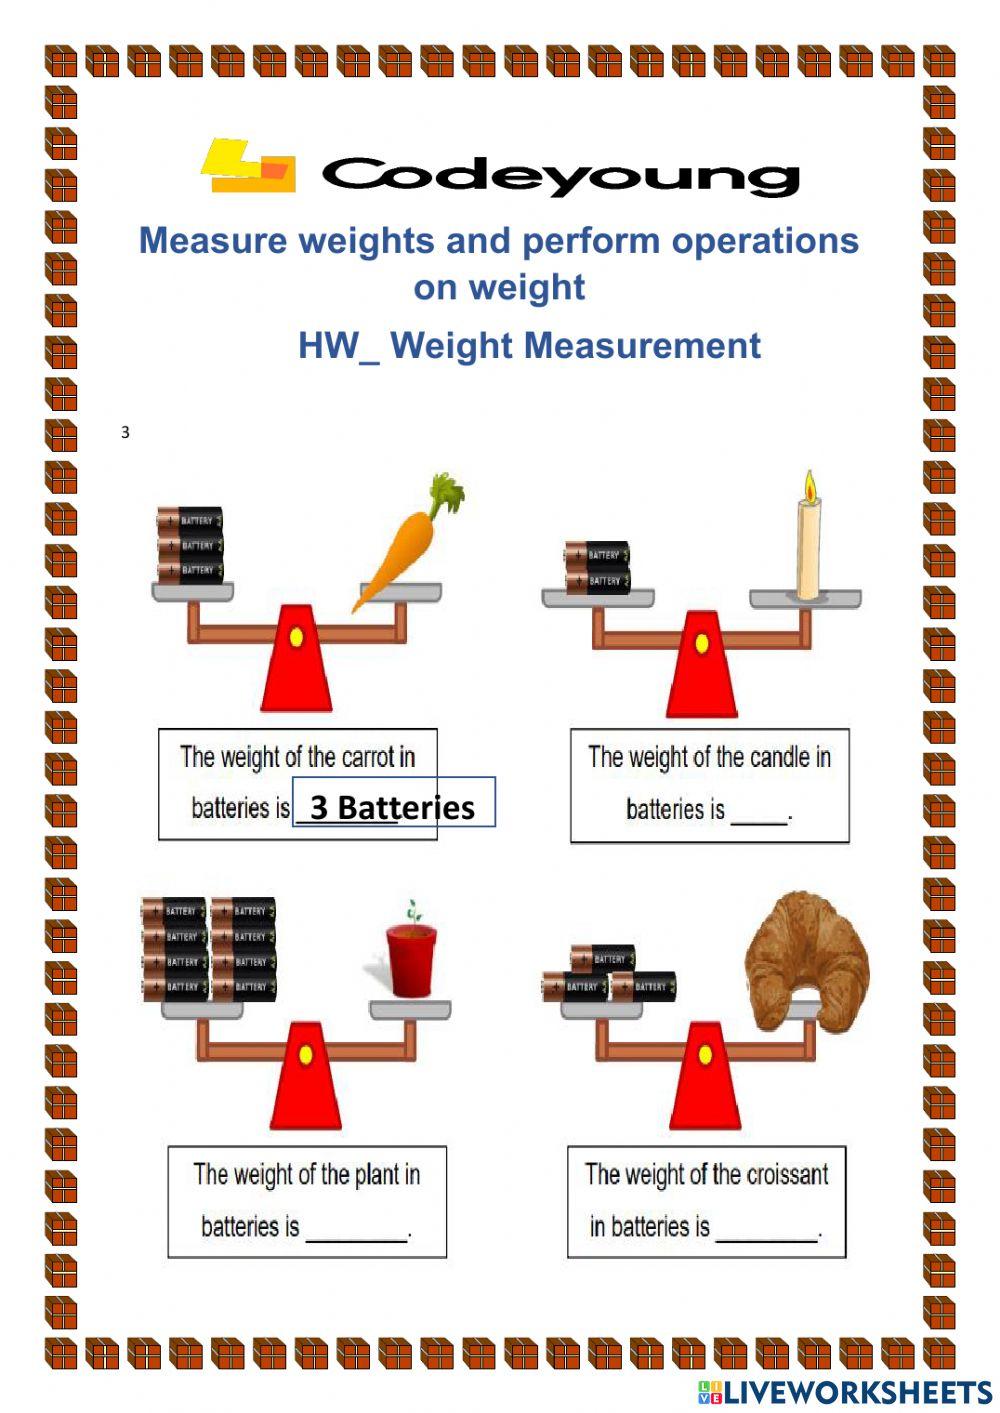 Measurement of weight